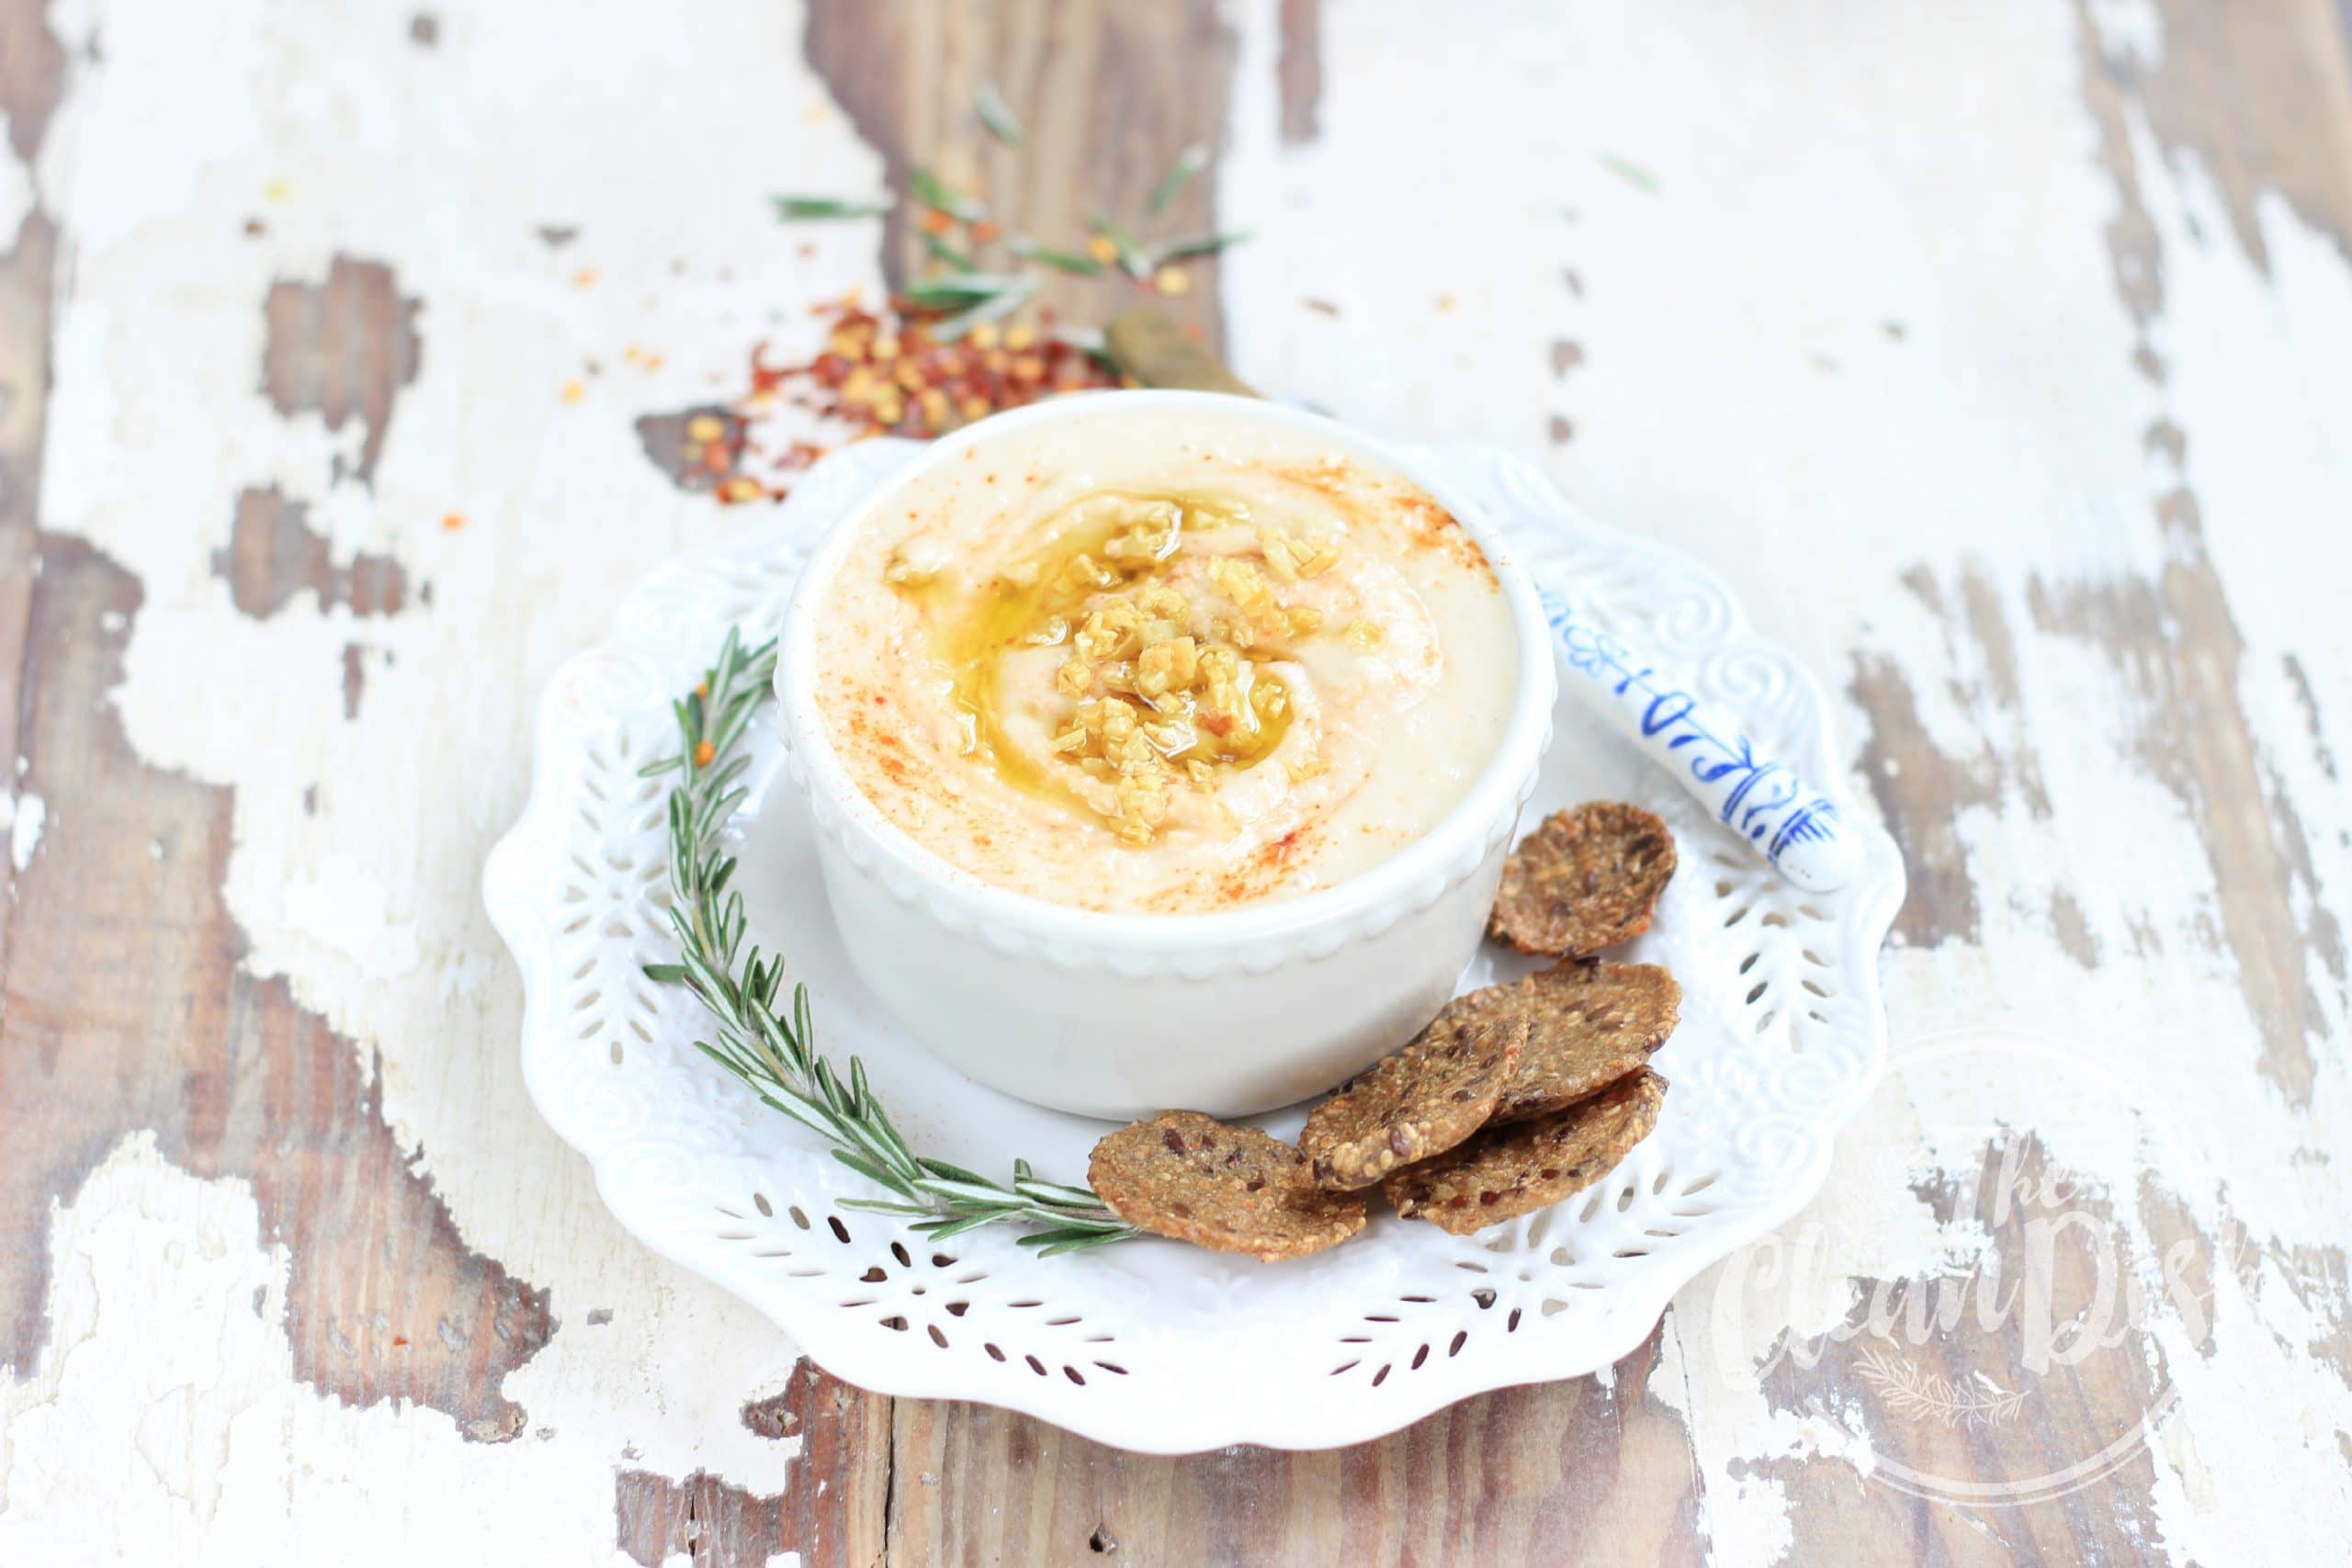 Roasted Garlic White Bean Dip from The Clean Dish